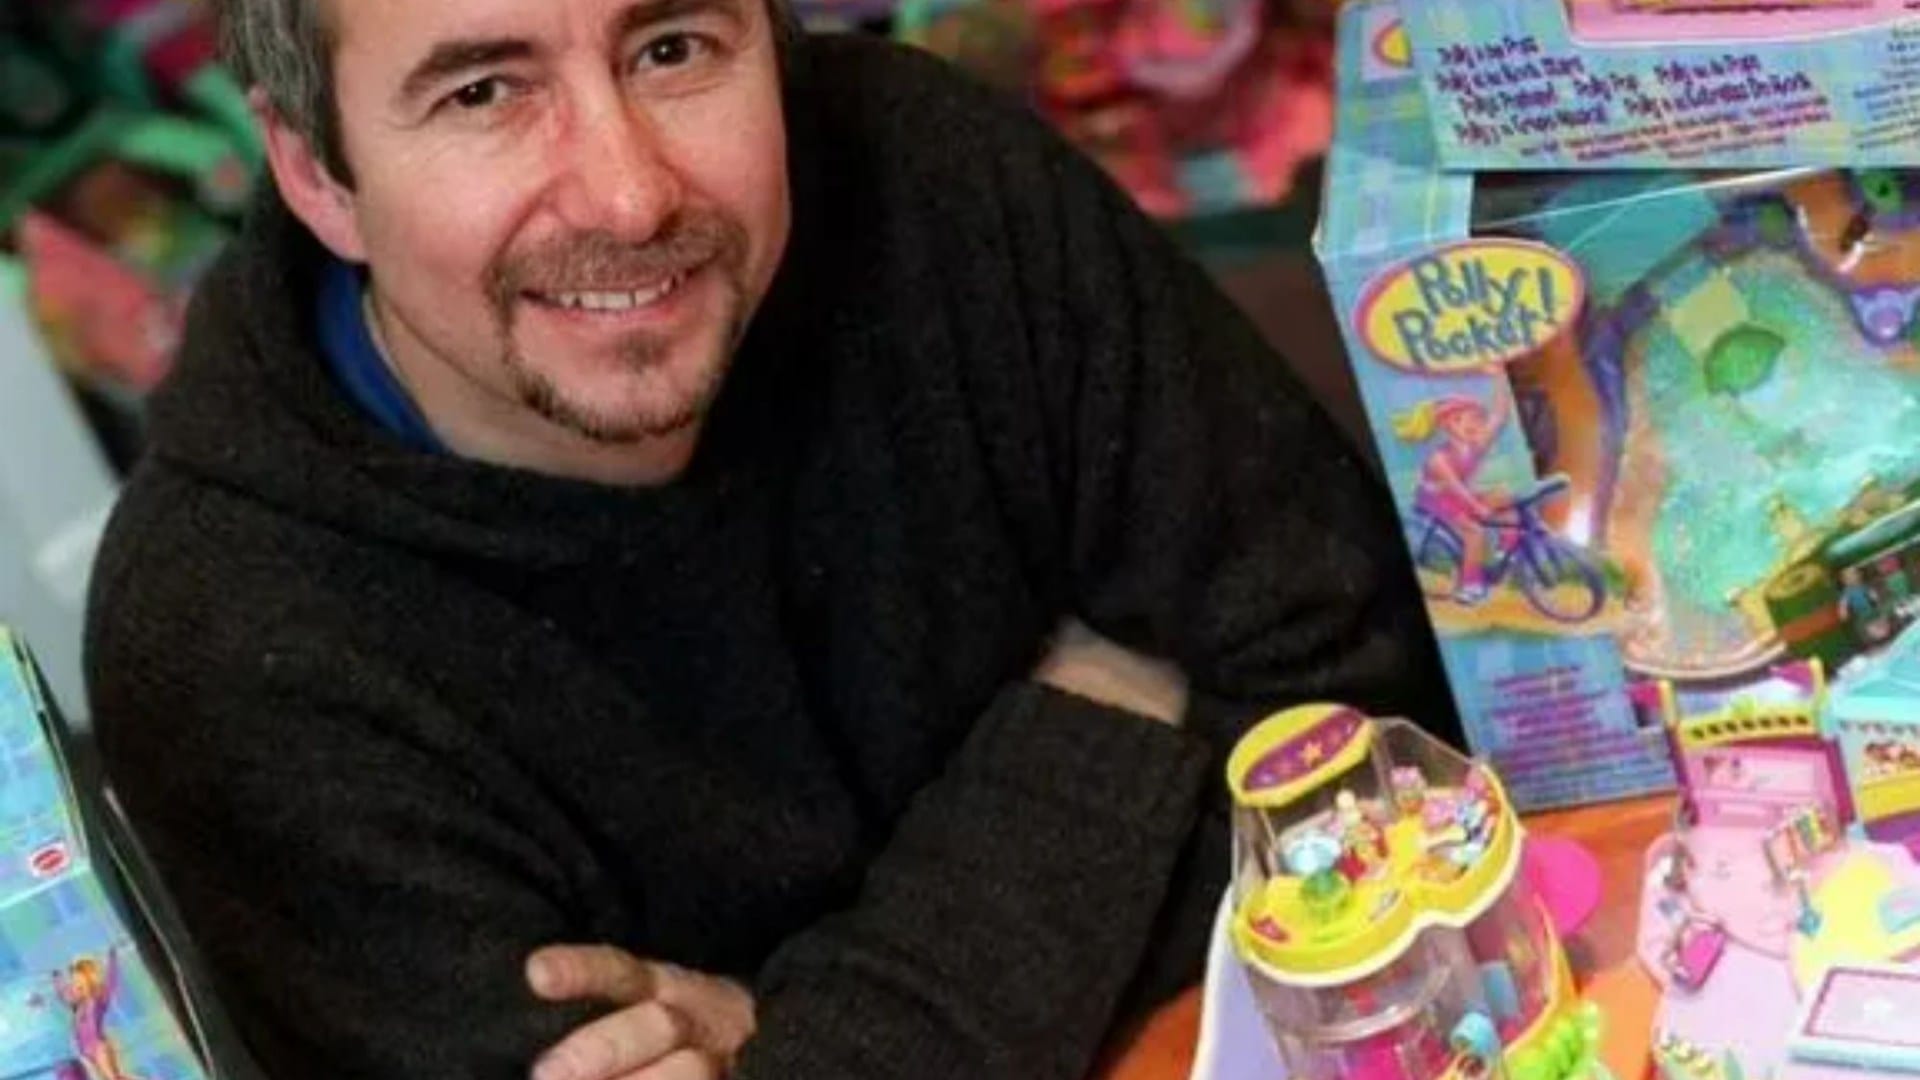 Chris Wiggs dead: British inventor who created Polly Pocket dies aged 74 after rare cancer battle